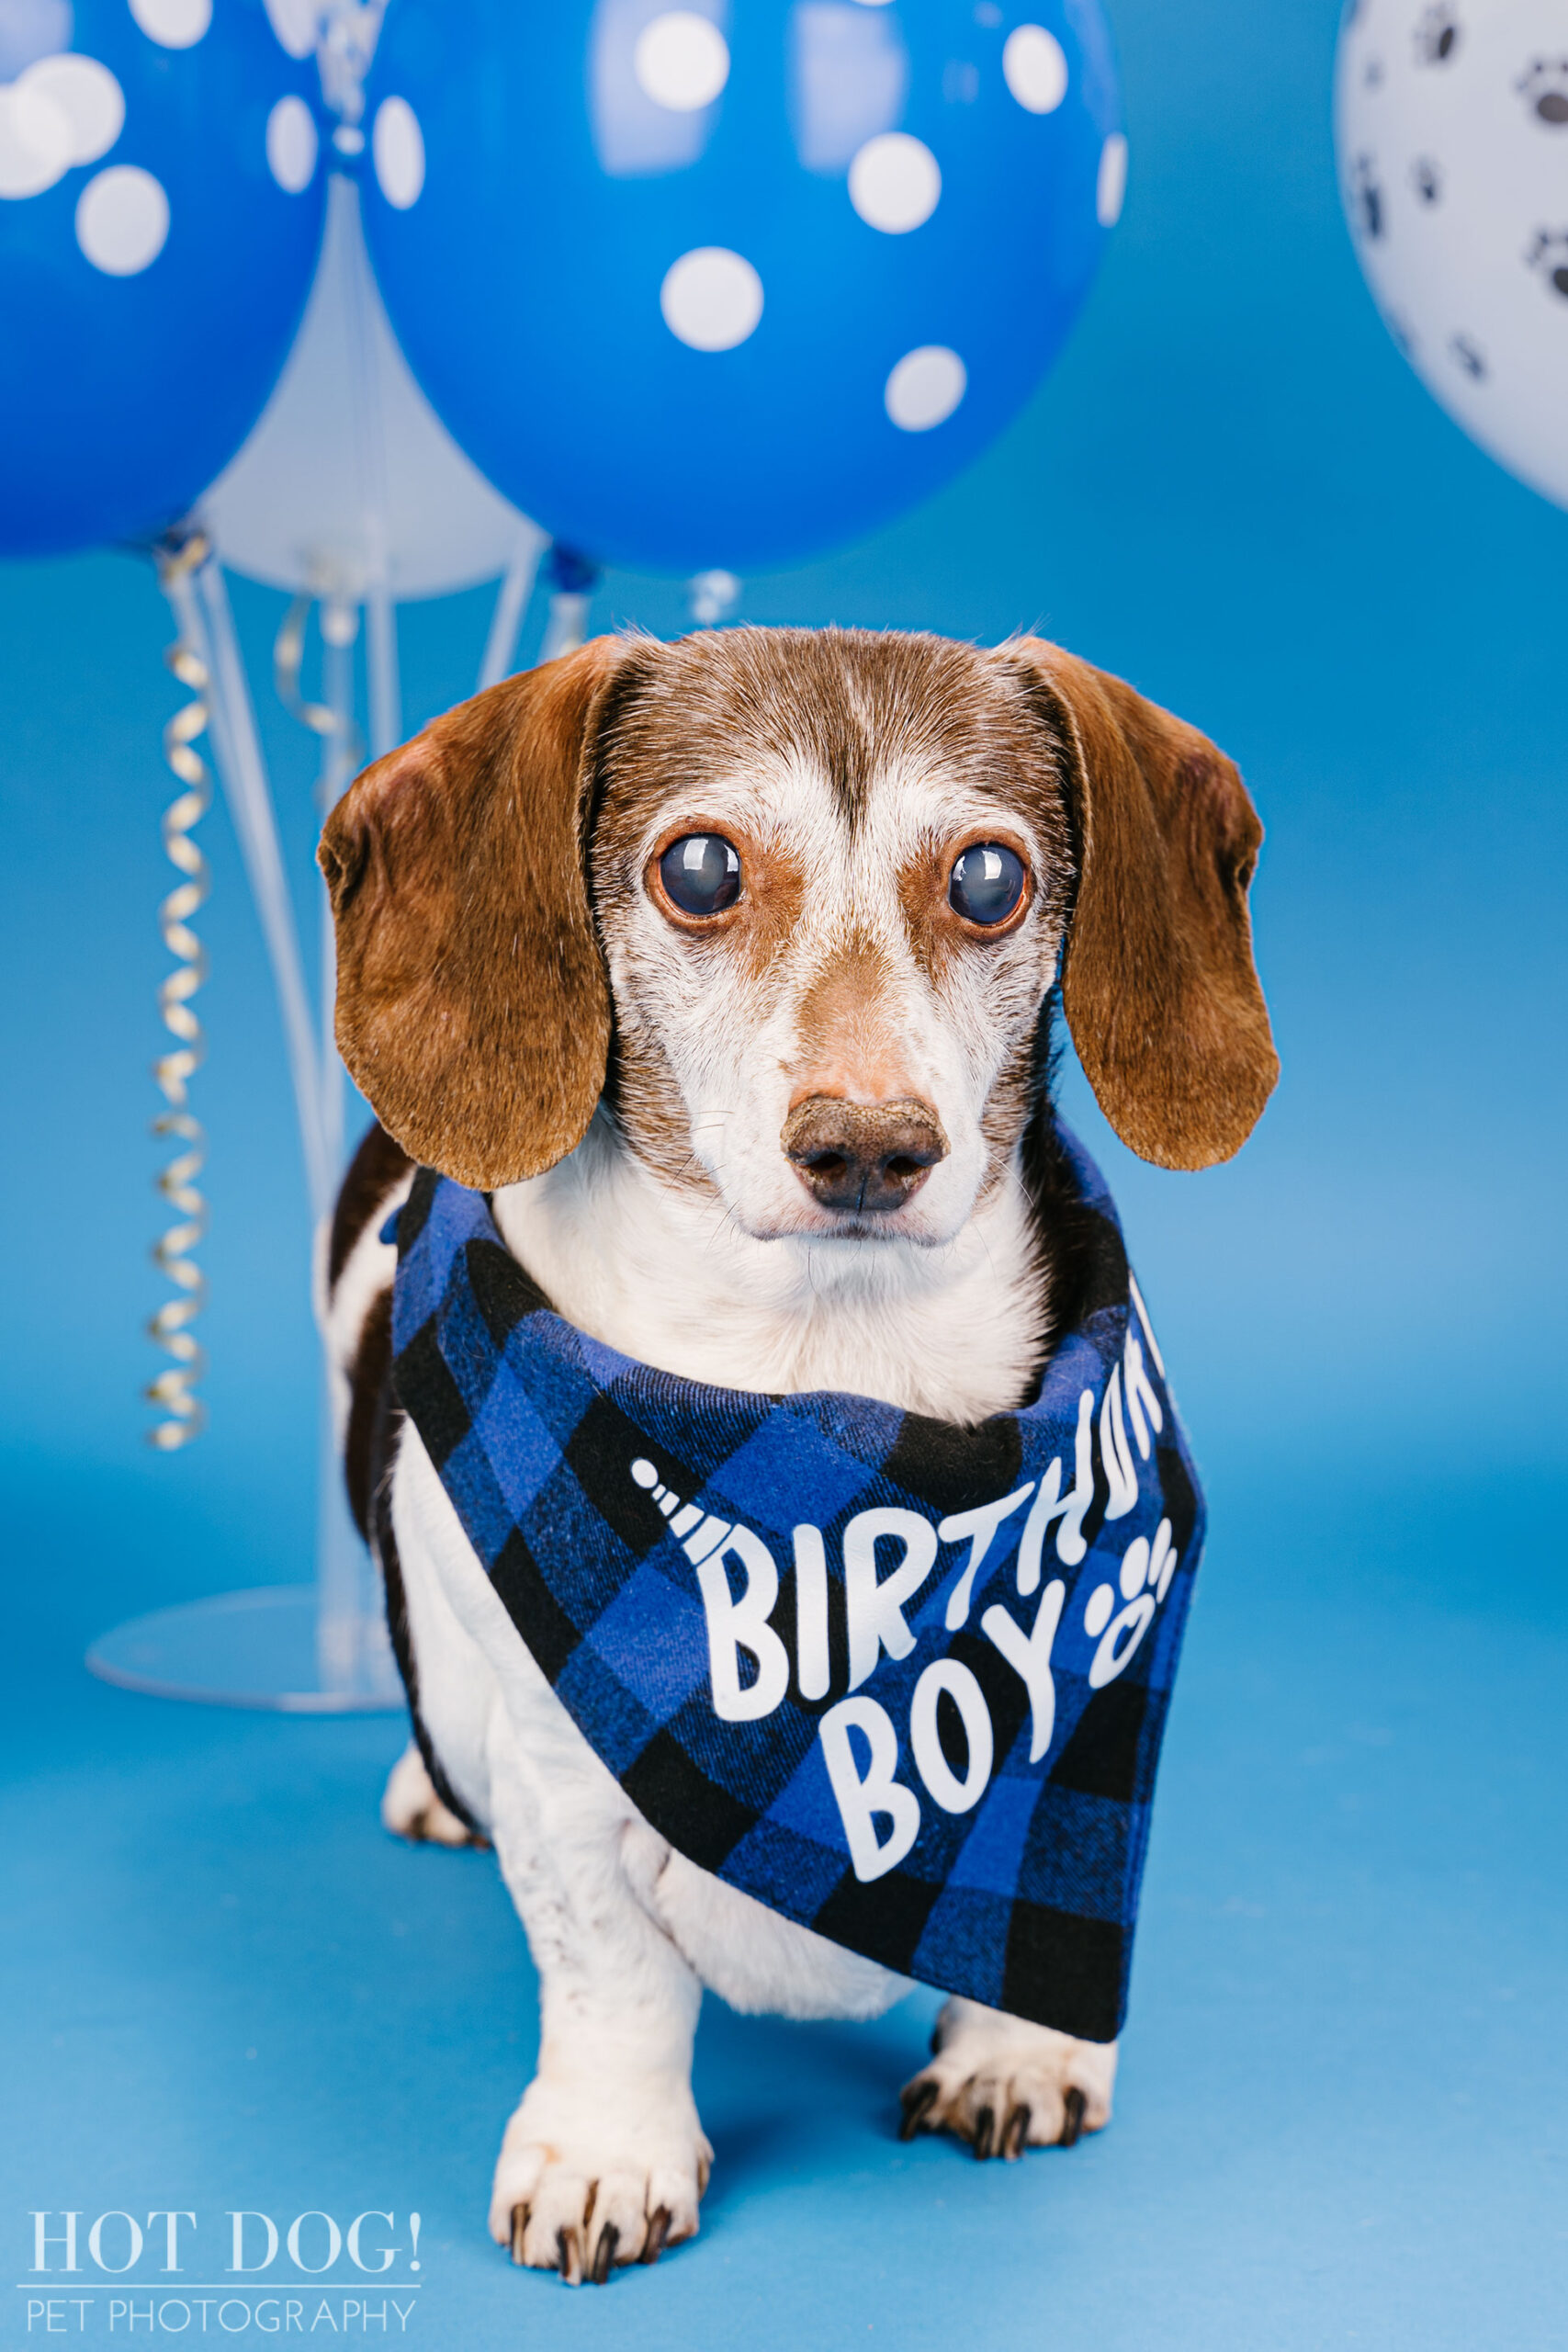 Dachshund birthday photo by Hot Dog! Pet Photography in Central Florida